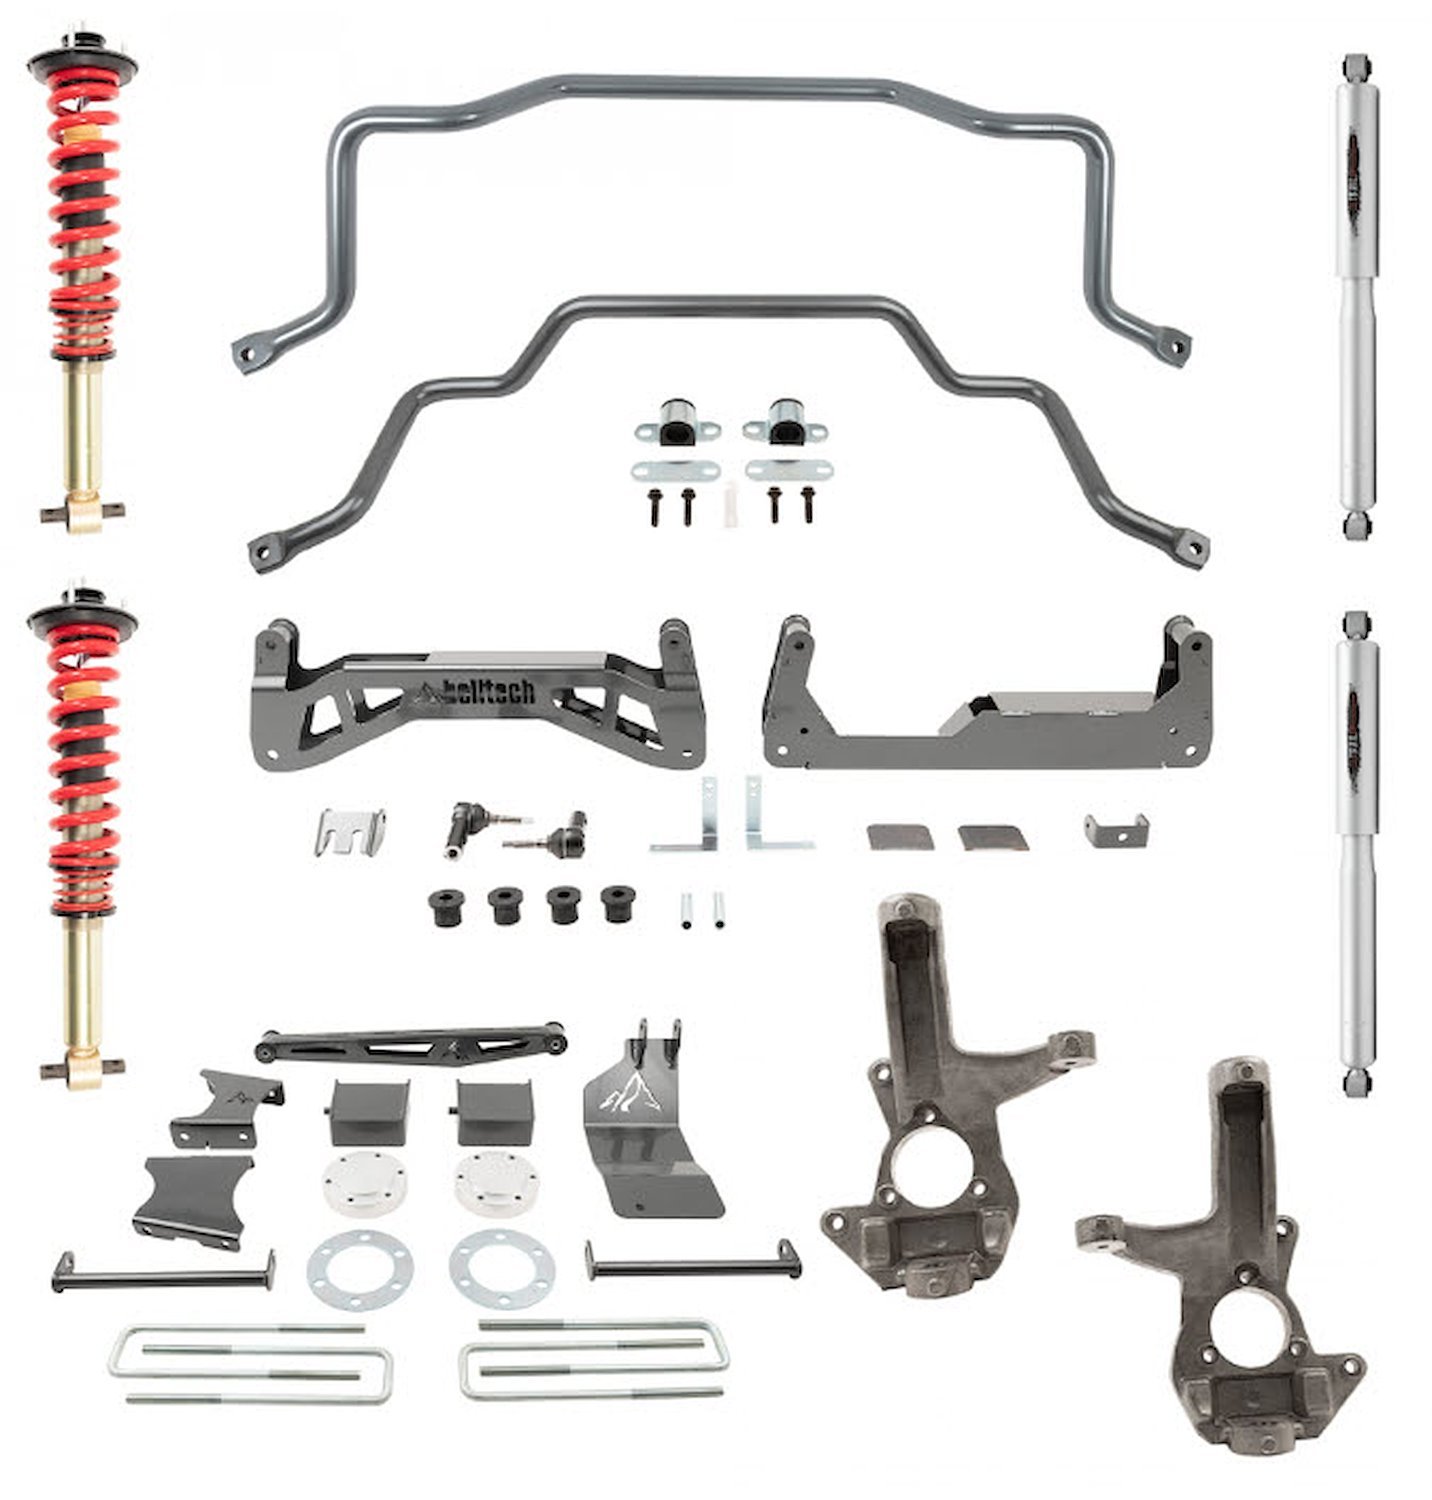 150203HK 7-9 in. Suspension Lift Kit Fits 2016-2018 GM 1500 Pickup Trucks 2WD/4WD [w/Front Coil-Overs, Rear Shocks & Sway Bars]